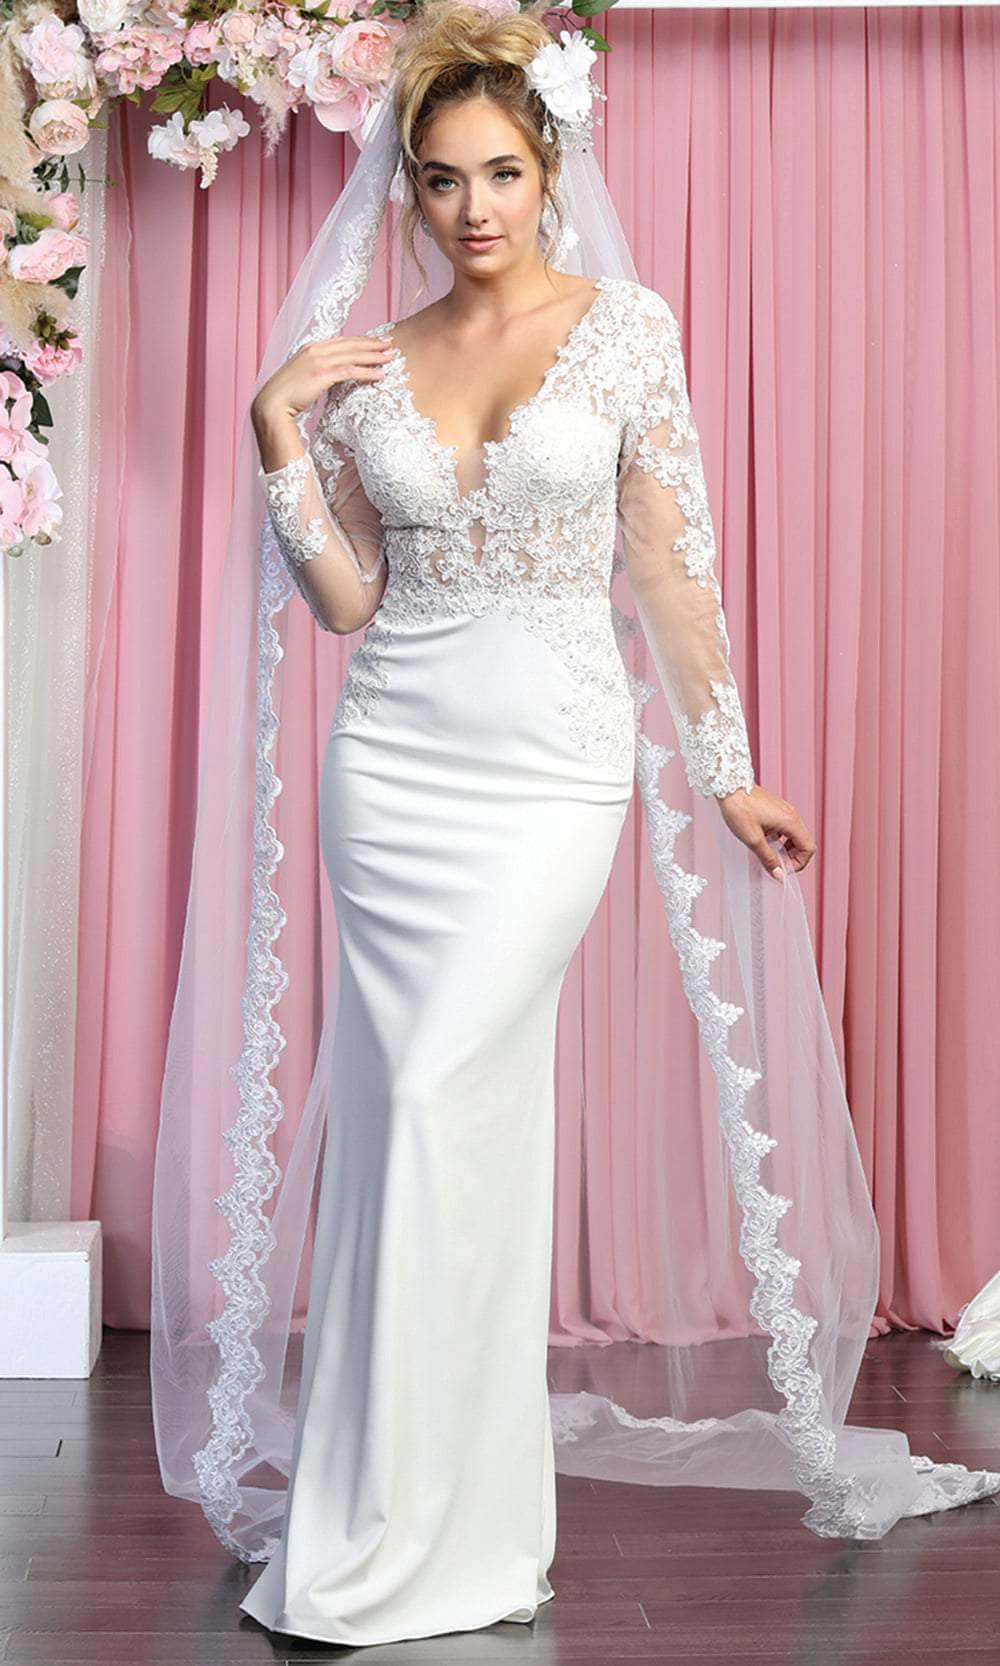 May Queen RQ7901 - Long Sleeves Low-cut V-neck Wedding Gown
